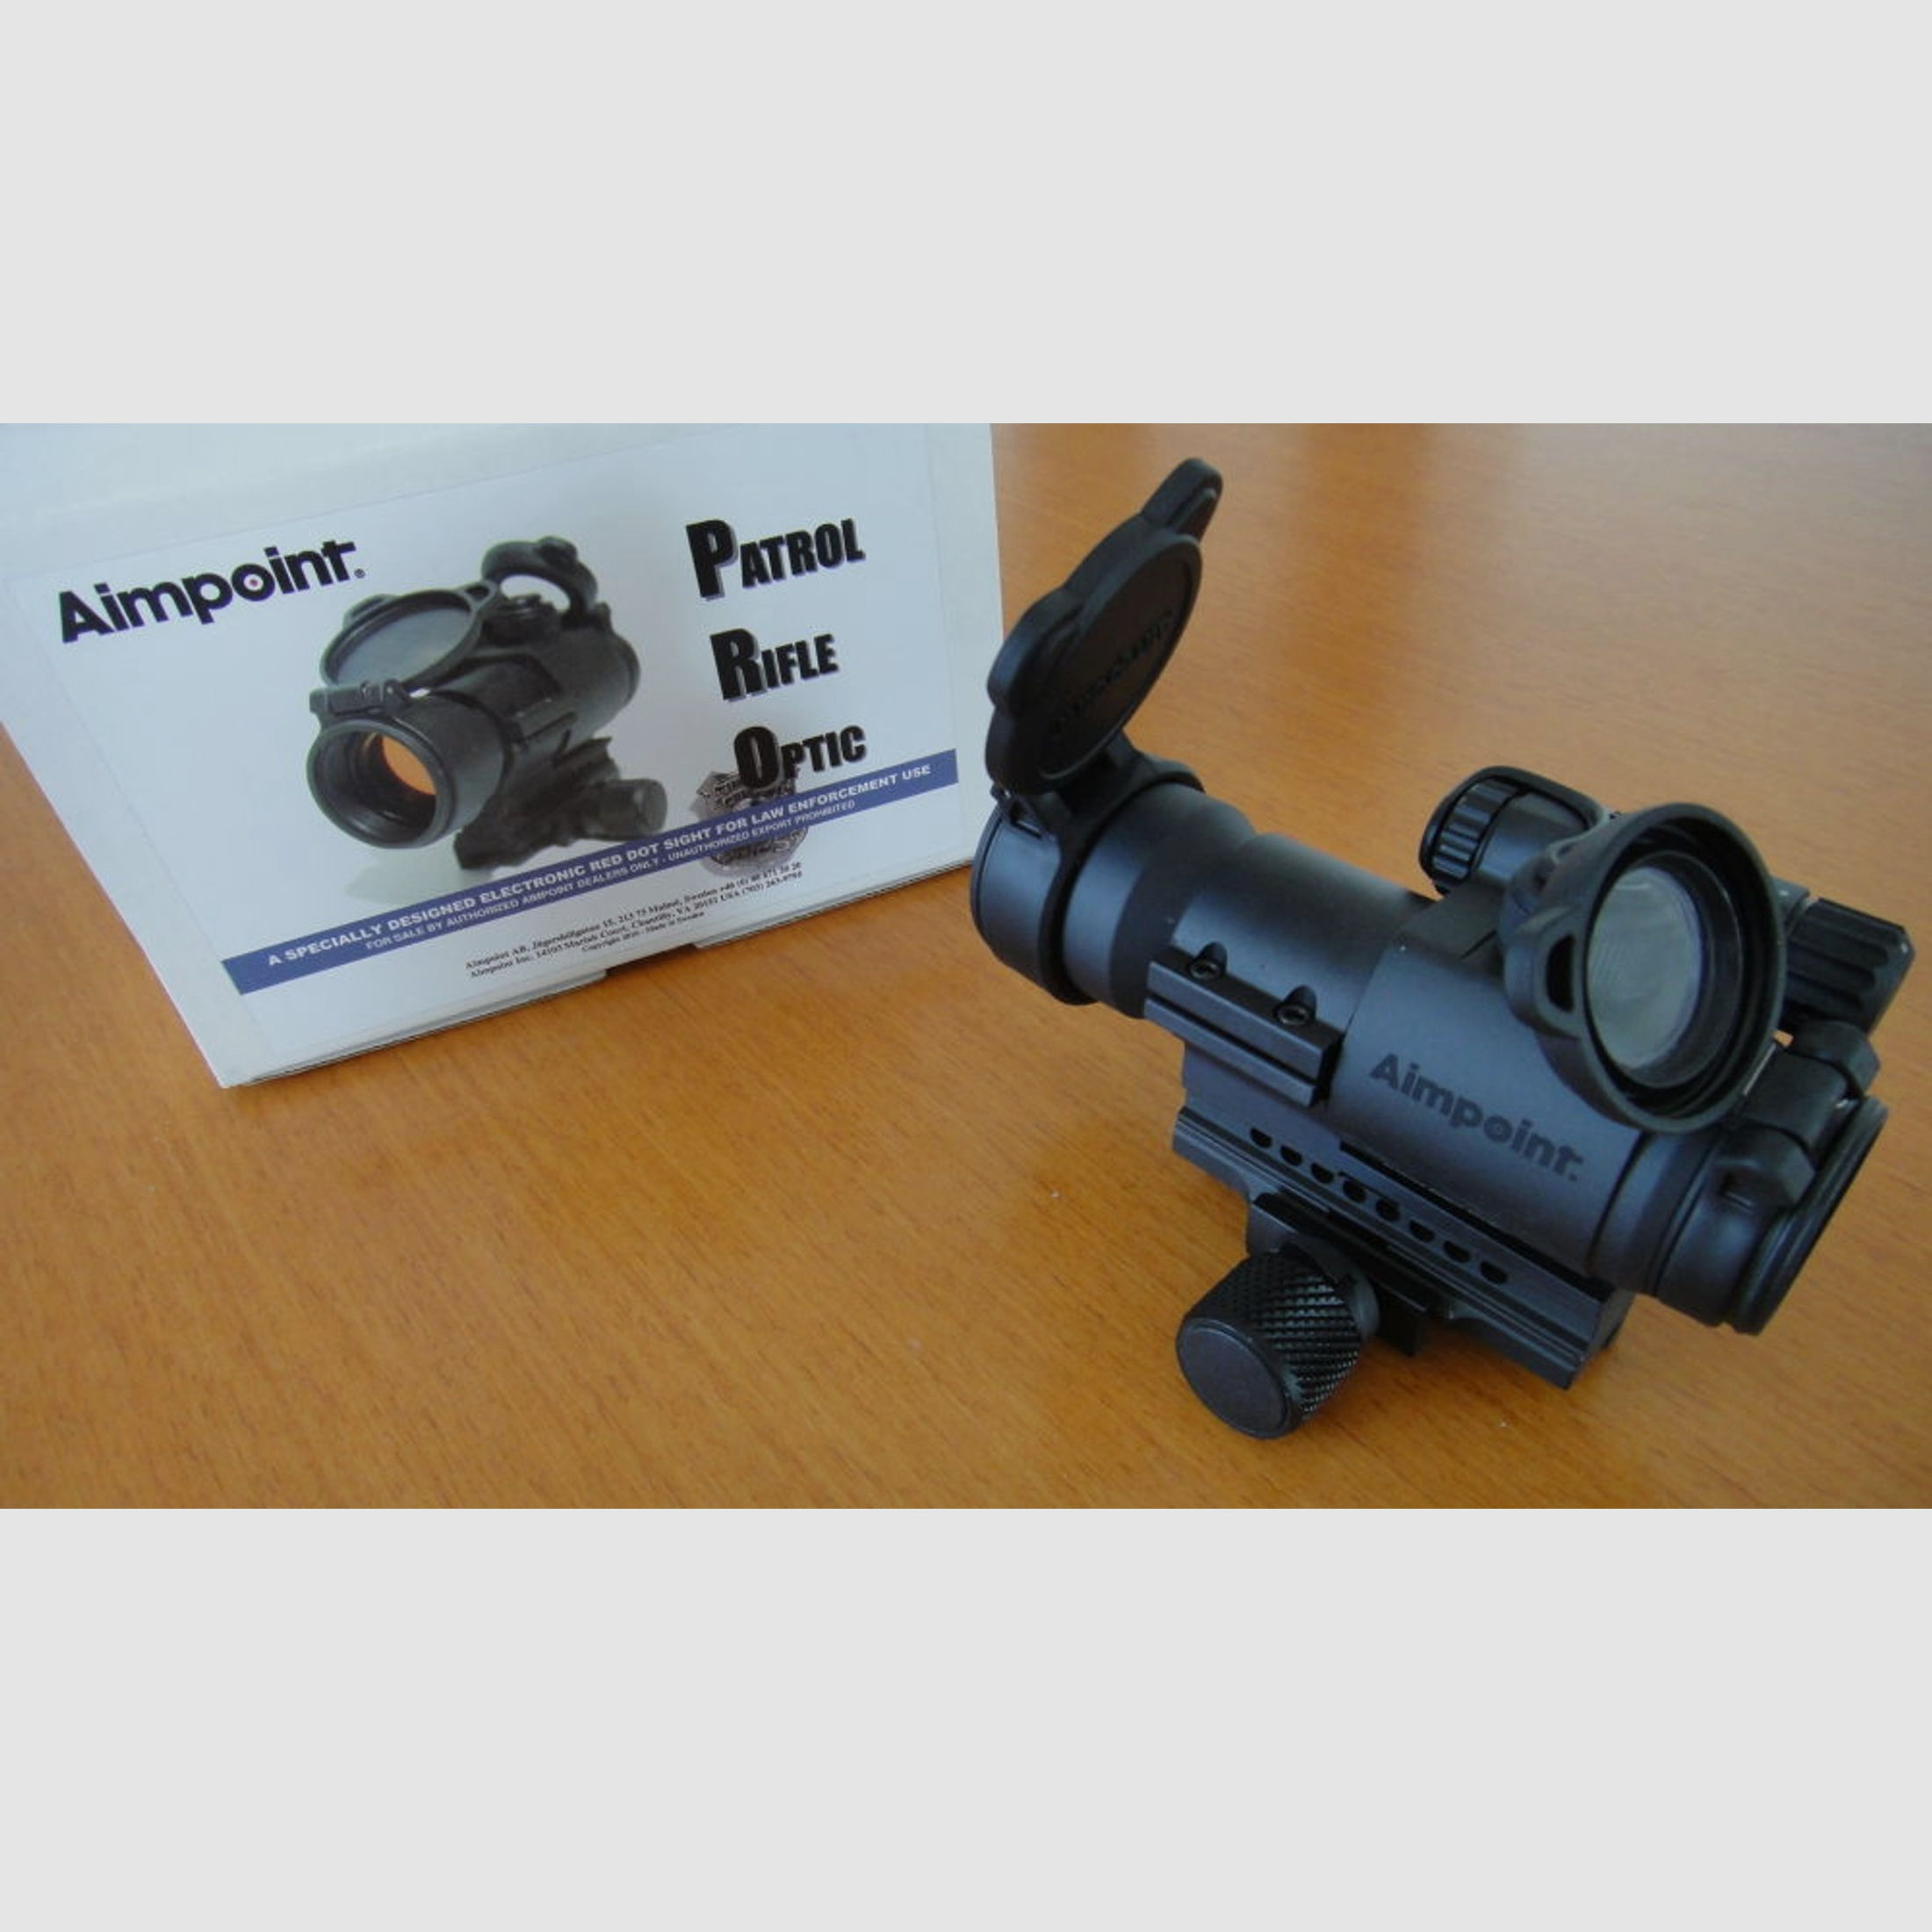 Aimpoint	 Aimpoint PRO-Patrol Rifle Optic